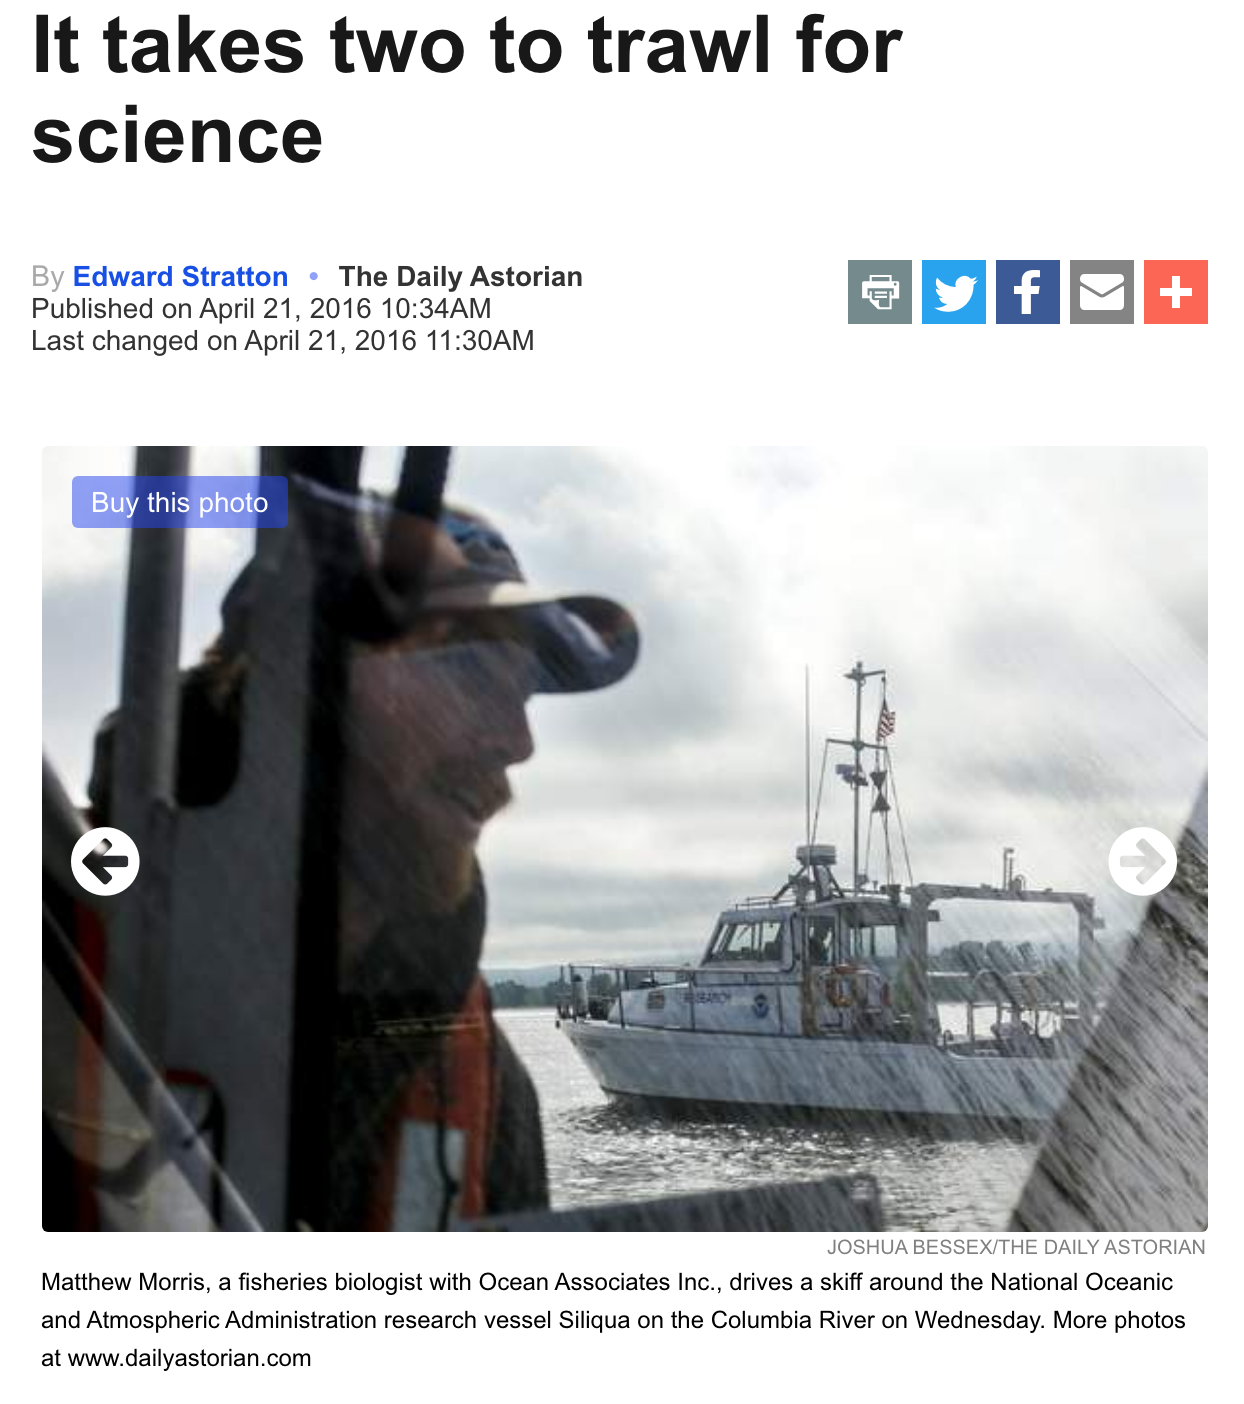 It Take Two To Trawl For Science